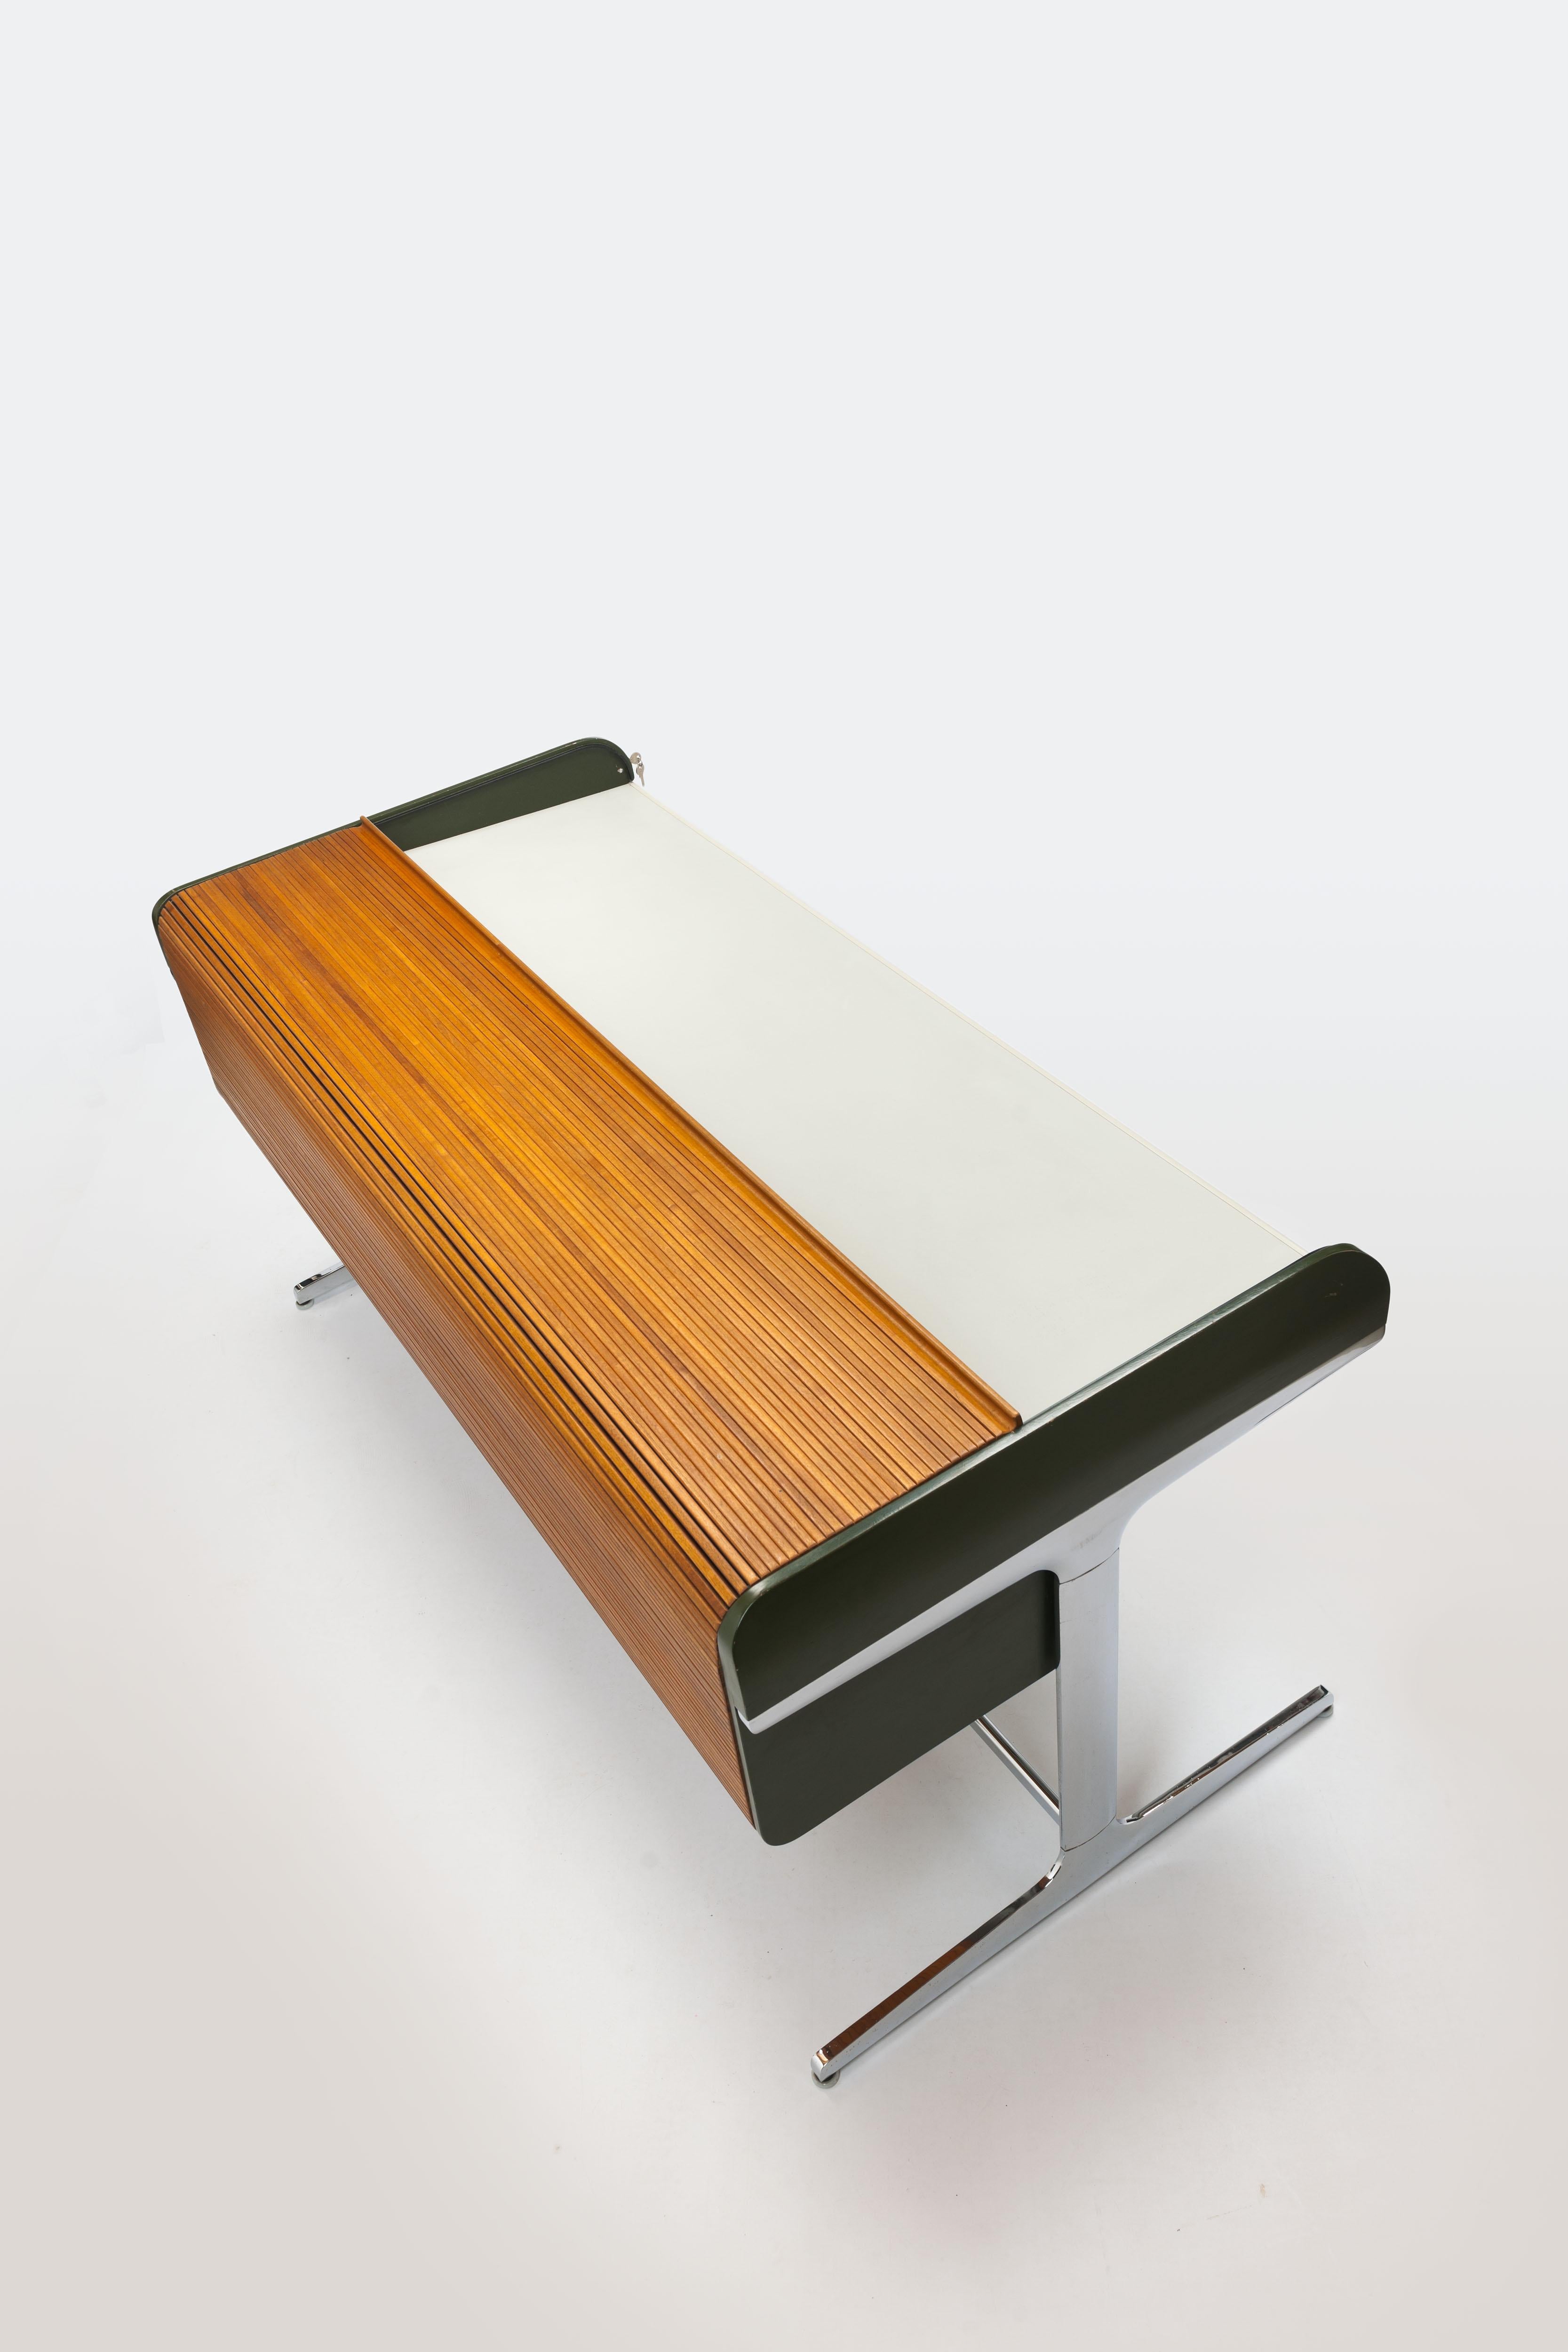 Solid walnut first edition 1964 'Action Office' desk by George Nelson for Herman Miller. 

This is the largest size desk that was available from the program. 
The desk is executed with a solid walnut tambour roll top that slides away and reveals